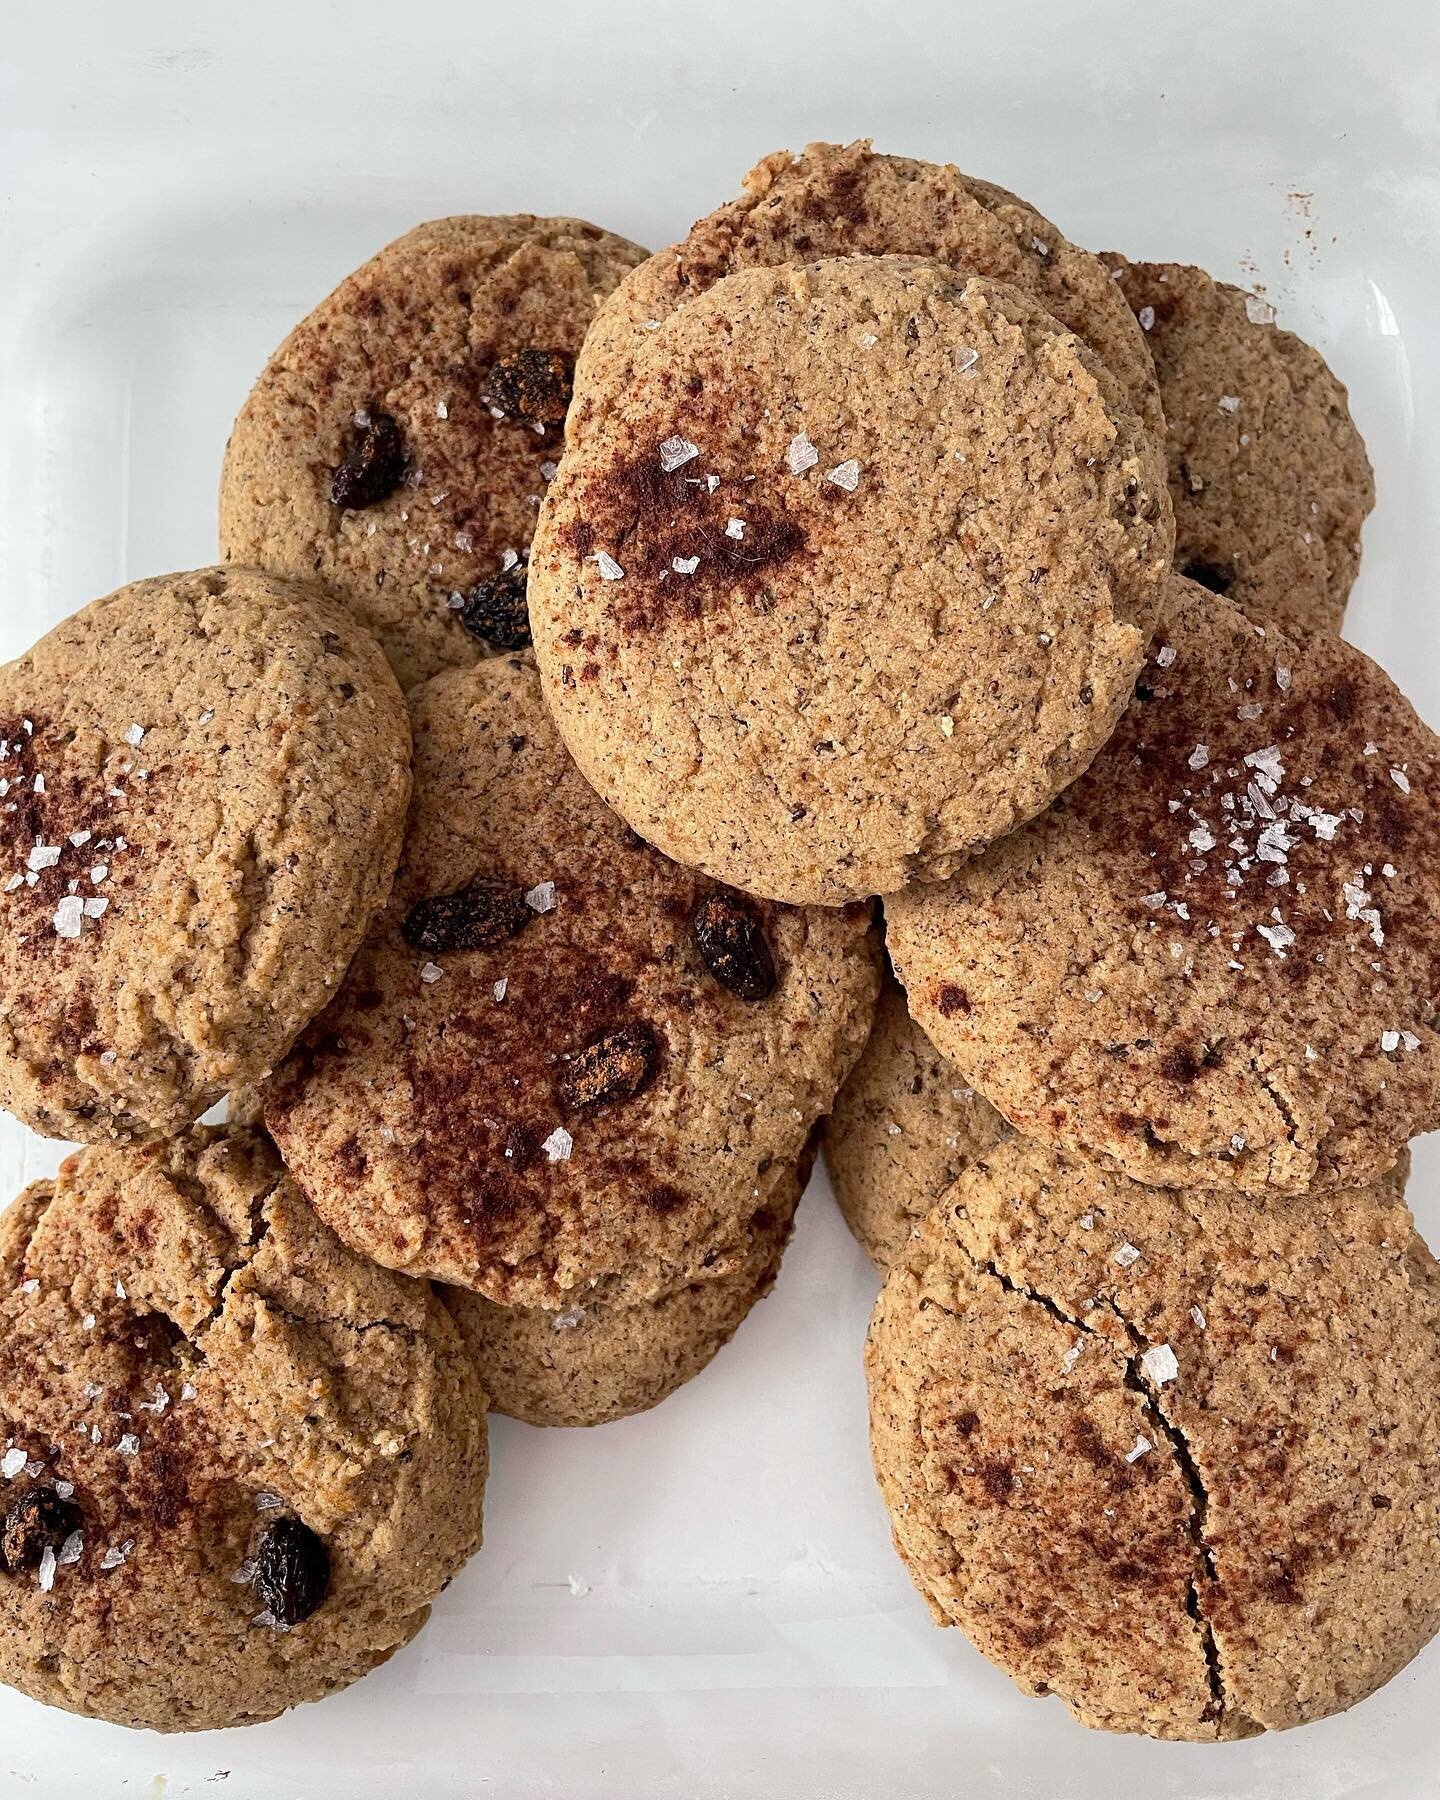 Currently eating/drooling over a Cinnamon Raisin Cookie 🤤 Easy peasy, whole food recipe | gluten free, vegan, no refined sugar👇🏼

INGREDIENTS
1/2 cup coconut oil, softened to room temperature 1 c coconut sugar 1 tsp pure vanilla bean powder  1/4 c